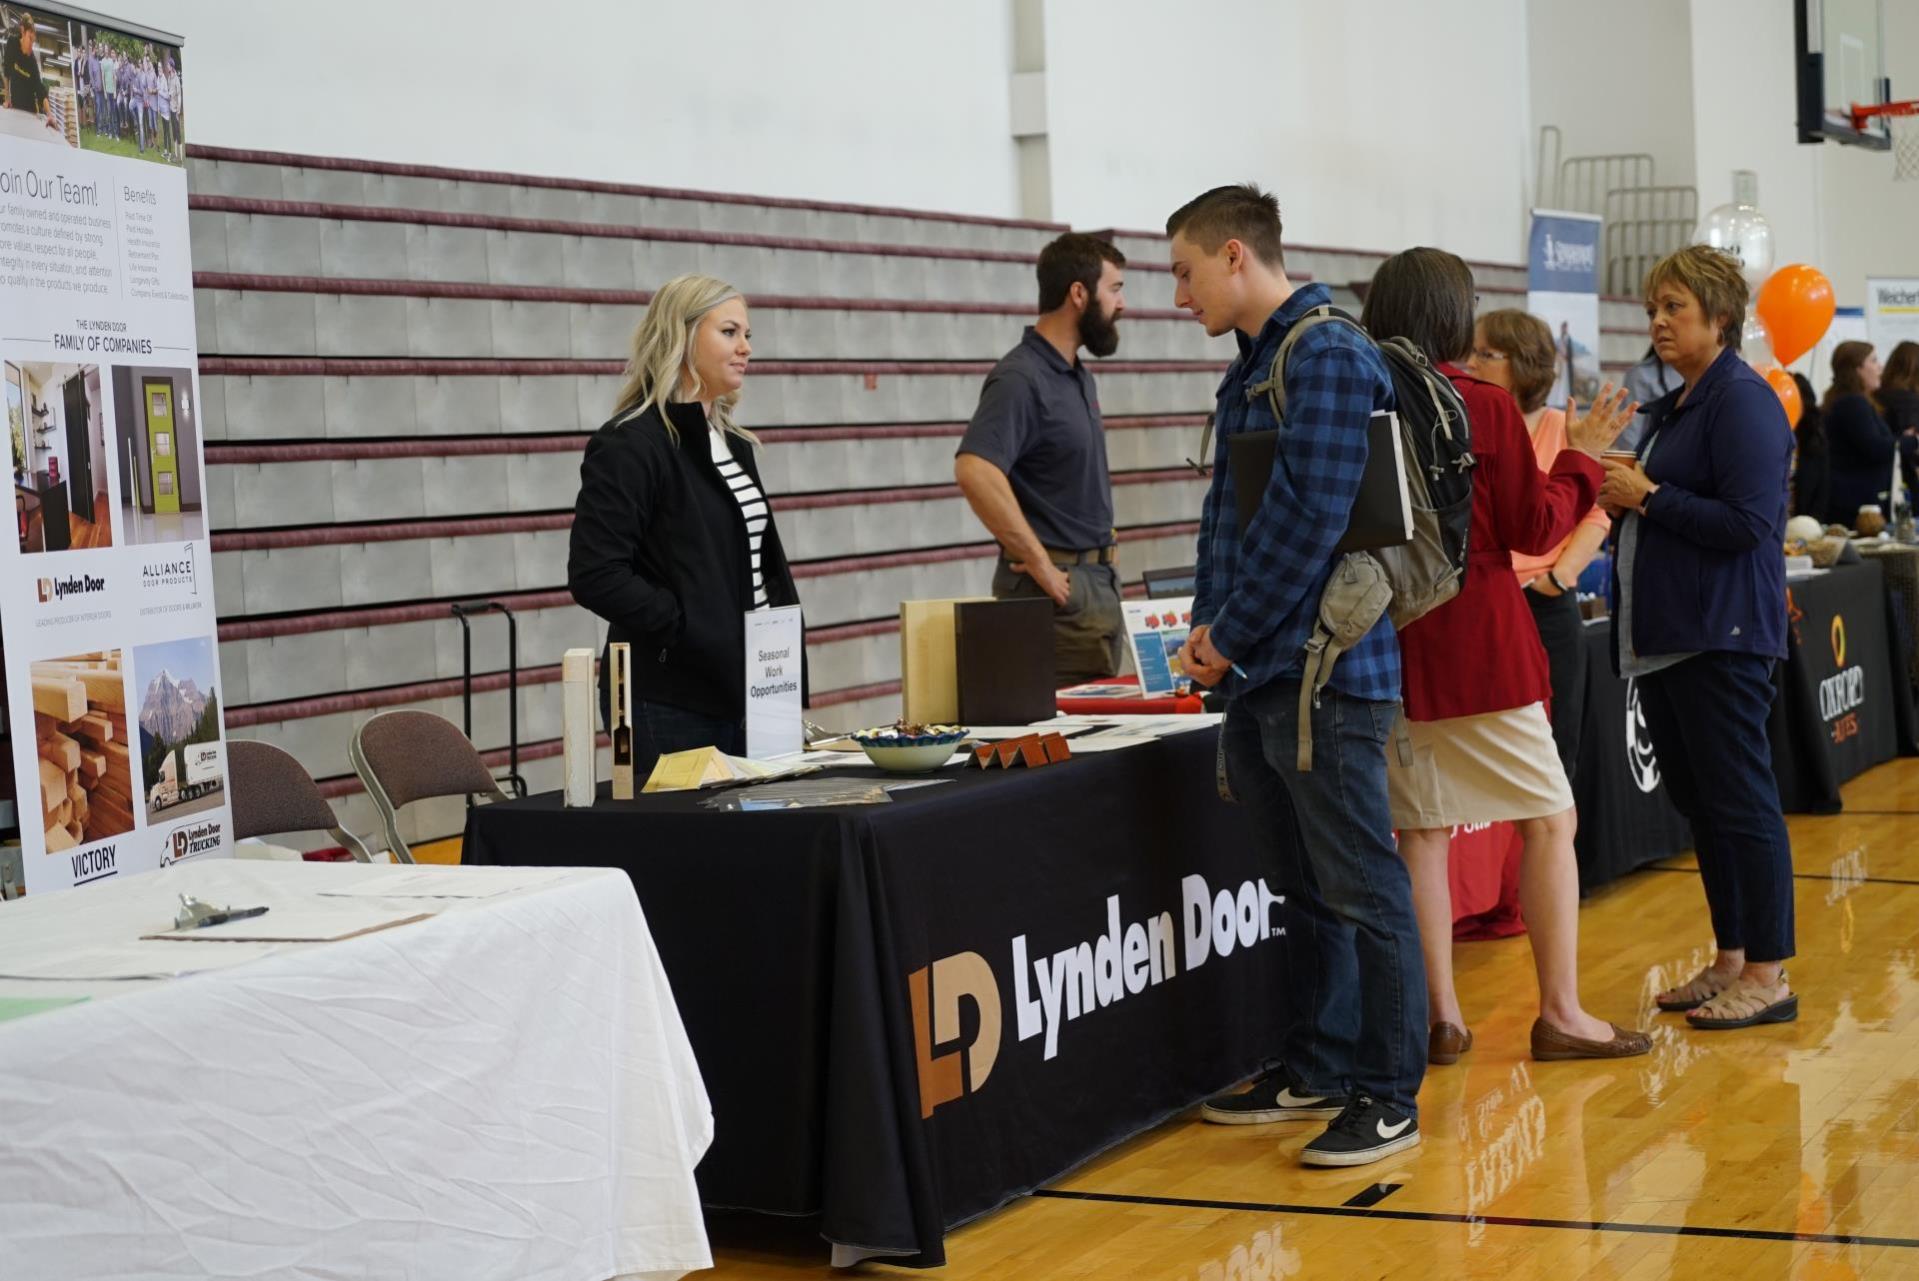 Students and community members attend the WCC job fair in the Pavilion (Student Recreation Center) to connect with local employers and learn about job opportunities.